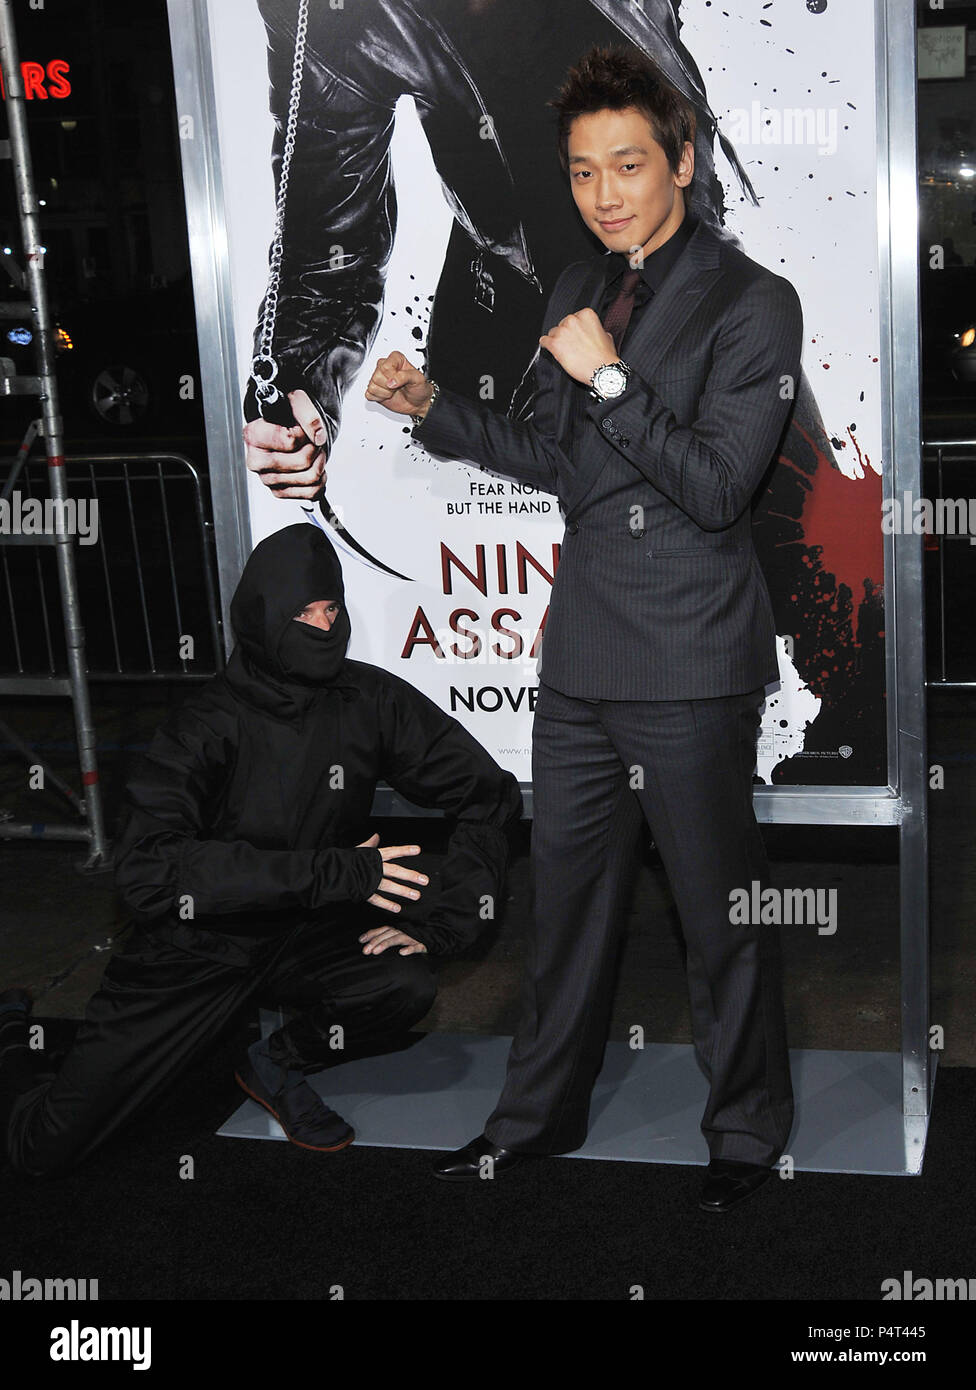 https://c8.alamy.com/comp/P4T445/rain-raizo-ninja-assassin-premiere-at-graumans-chinese-theatre-in-los-angeles02-rain-raizo-02-red-carpet-event-vertical-usa-film-industry-celebrities-photography-bestof-arts-culture-and-entertainment-topix-celebrities-fashion-vertical-best-of-event-in-hollywood-life-california-red-carpet-and-backstage-usa-film-industry-celebrities-movie-celebrities-tv-celebrities-music-celebrities-photography-bestof-arts-culture-and-entertainment-topix-vertical-one-person-from-the-year-2009-inquiry-tsuni@gamma-usacom-fashion-full-length-P4T445.jpg